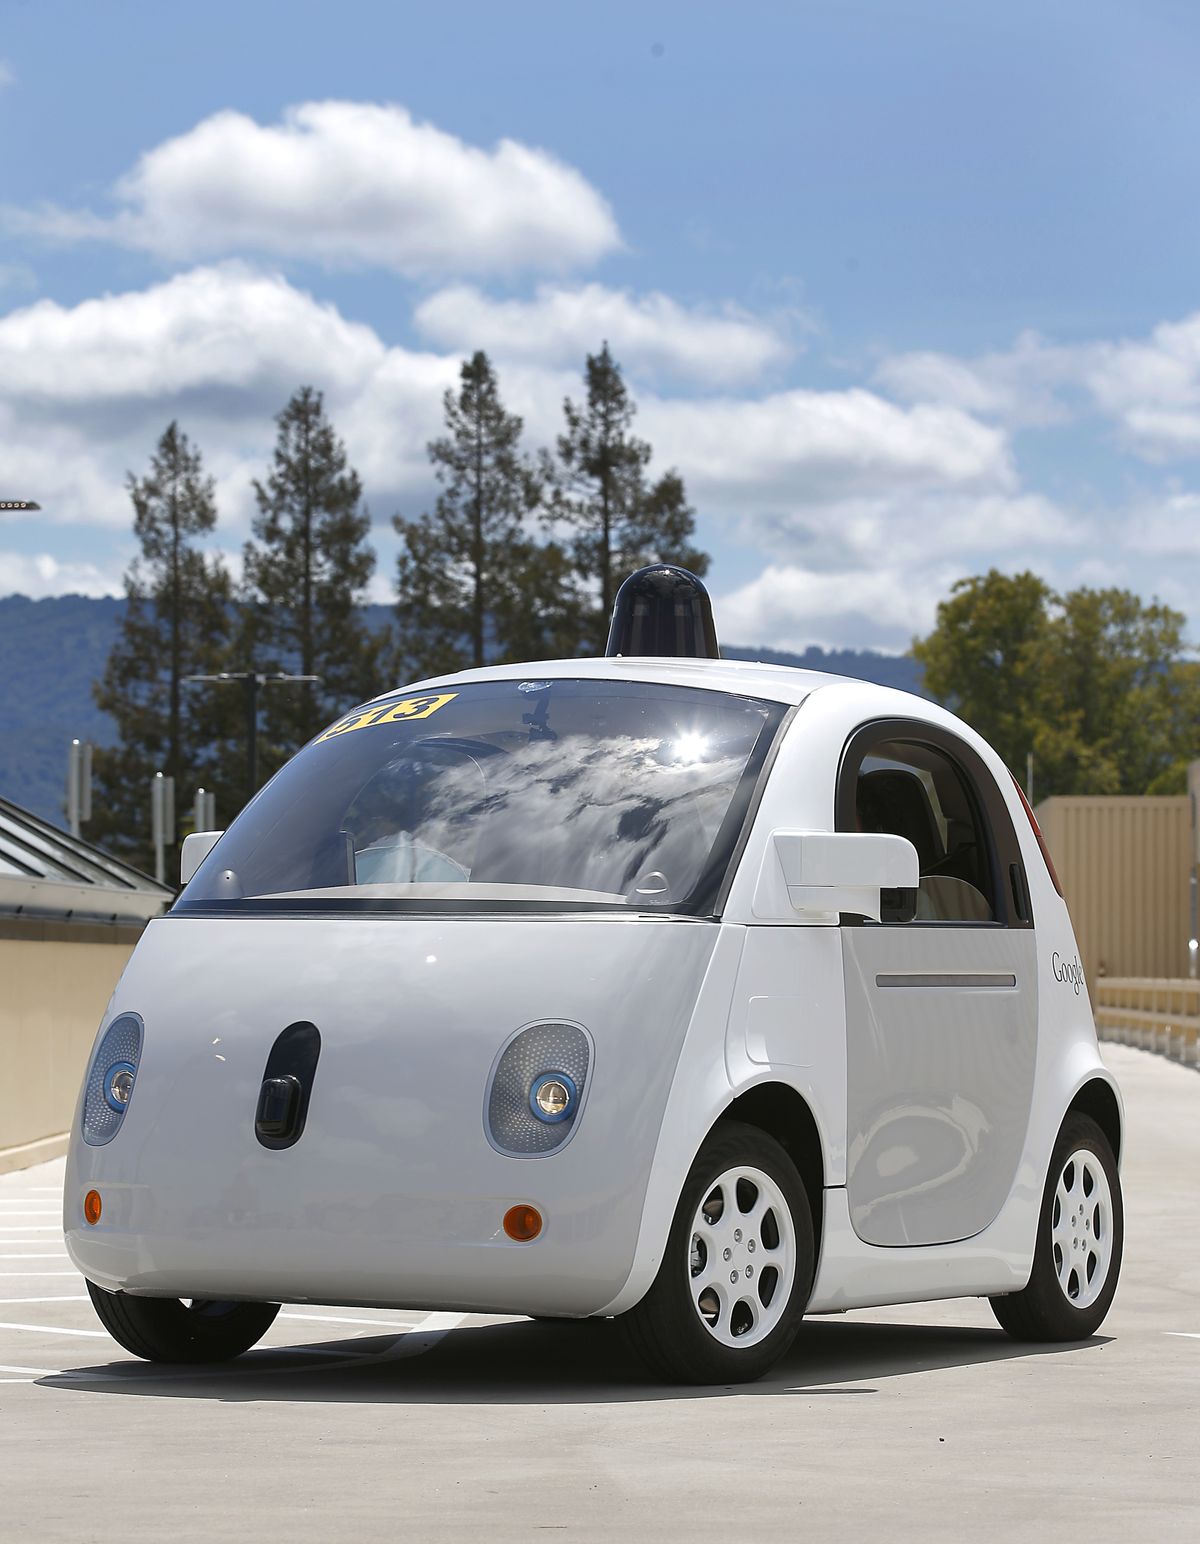 Google’s new self-driving prototype car drives around a parking lot during a demonstration at Google campus in Mountain View, Calif. The car, which needs no gas pedal or steering wheel, will make its debut on public roads this summer. (Associated Press)